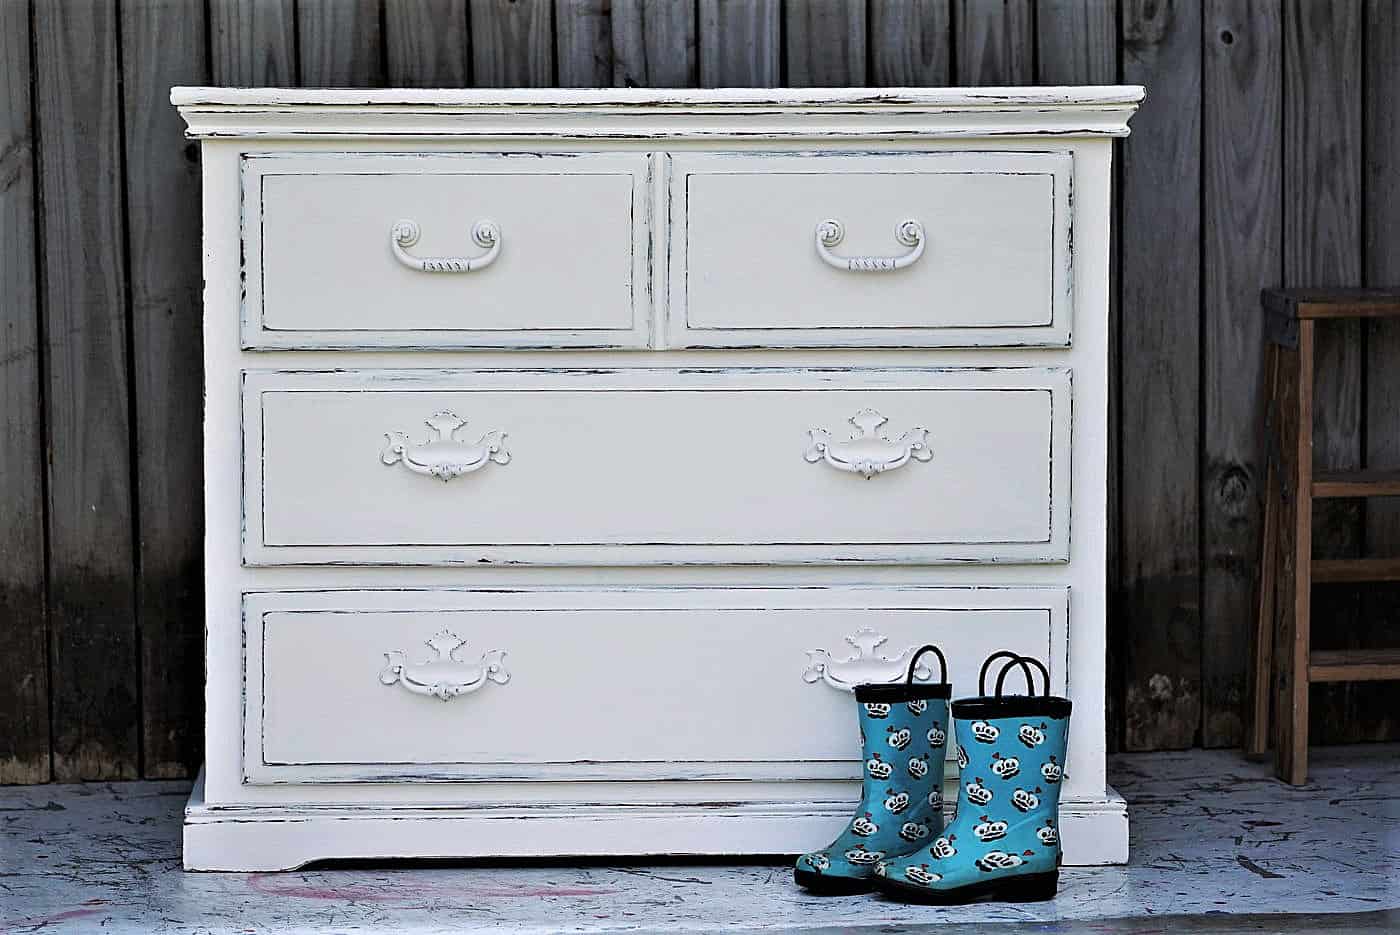 Painted Furniture Ideas  3 Easy Steps to Distressing with Chalk